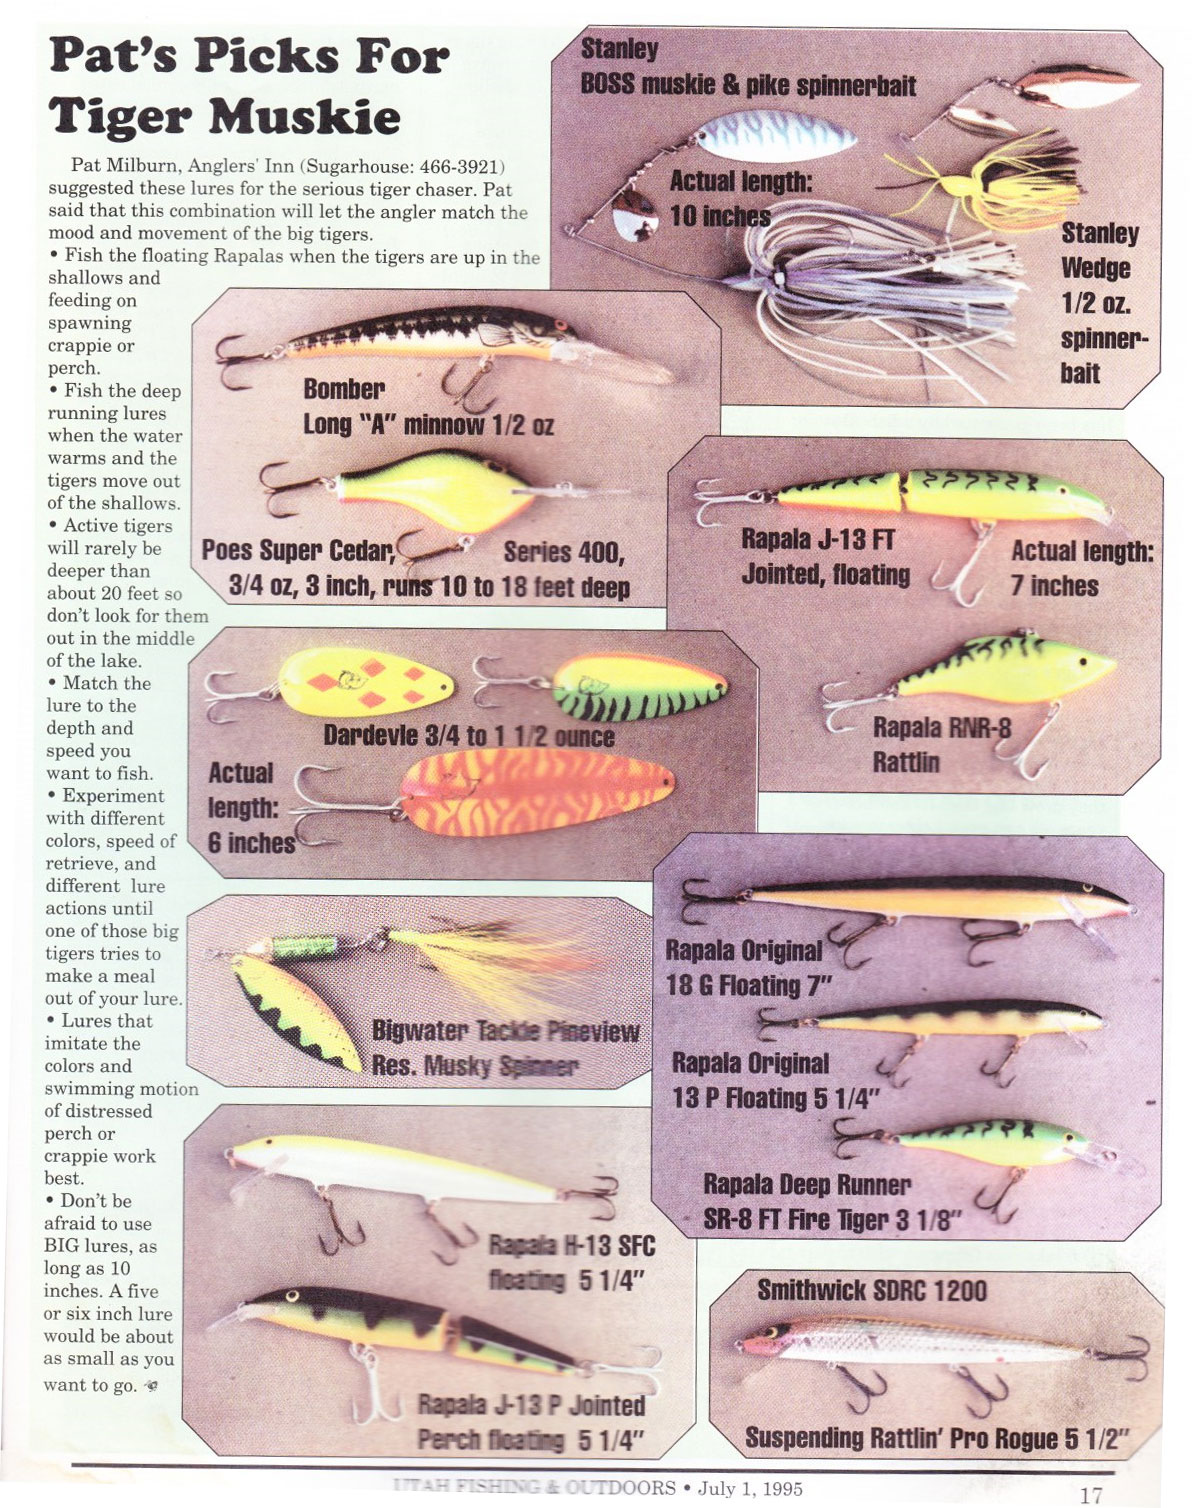 Pat's Picks For Tiger Muskie (Best Lures) 